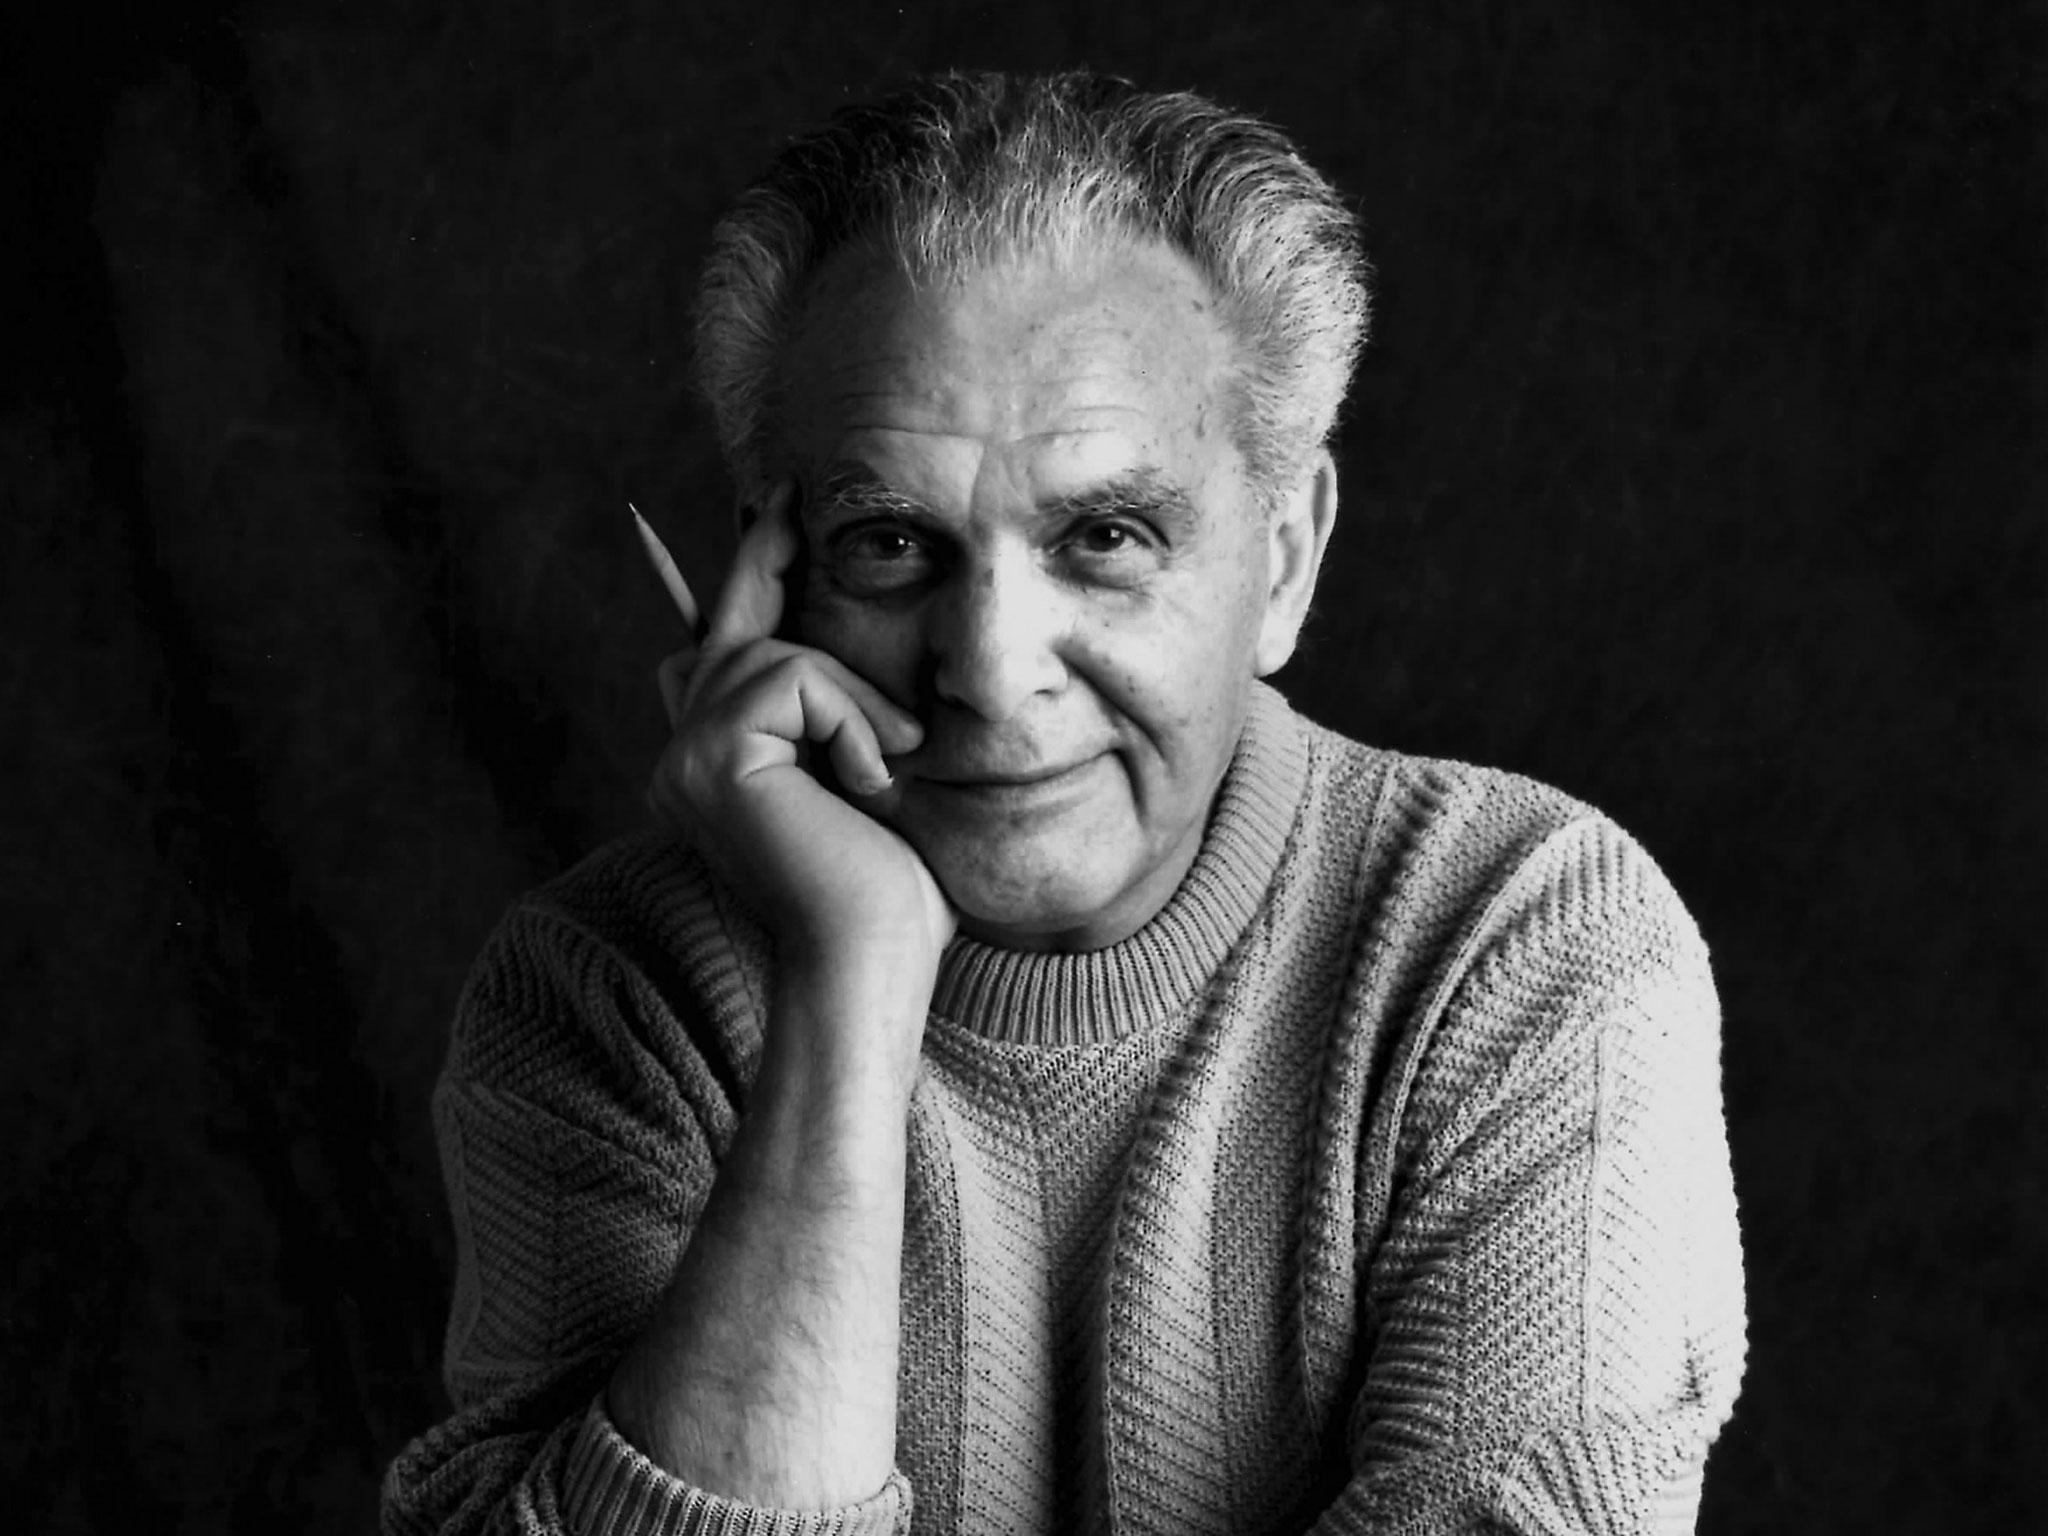 Jack Kirby’s revered works include Captain America and the Avengers